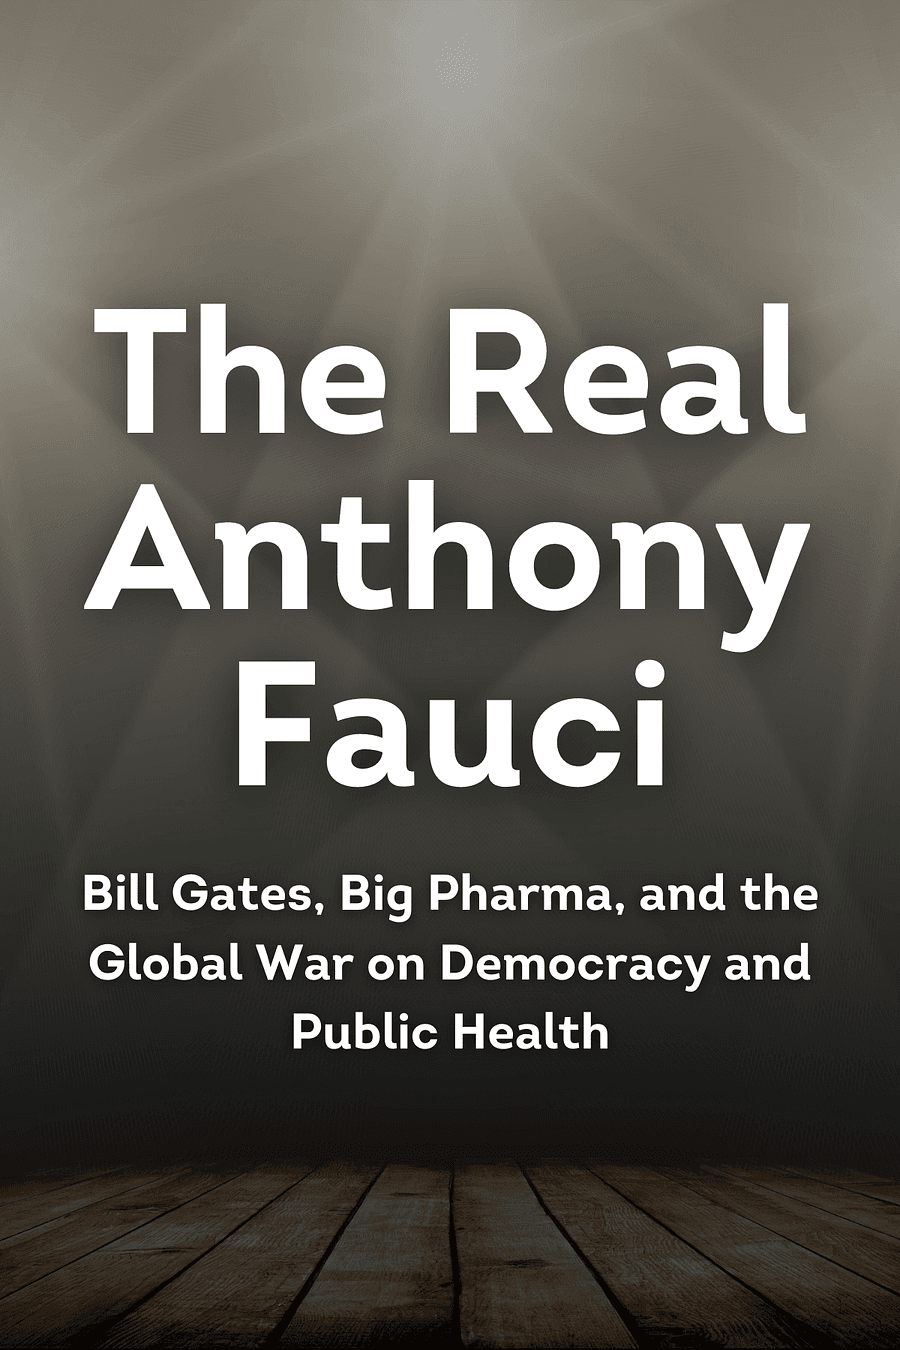 Real Anthony Fauci by Robert F. Kennedy Jr. - Book Summary